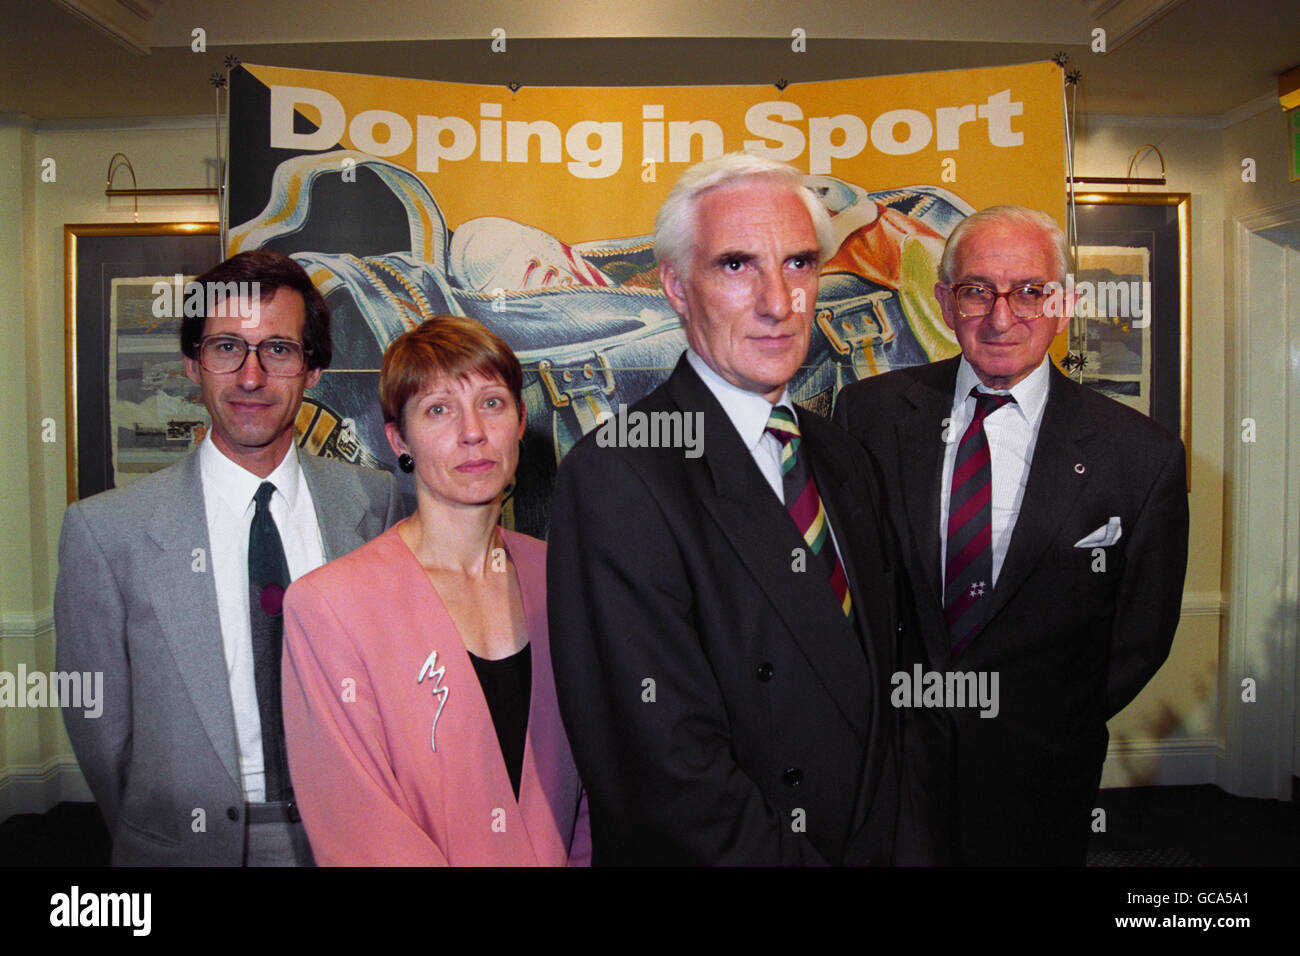 FROM LEFT: DR DAVID COWANS, HEAD OF THE LABORATORY FOR DOPE TESTING AT KING'S COLLEGE, MICHELLE VERROKEN, HEAD OF DOPING CONTROI AT THE SPORTS COUNCIL PROF PETER RADFORD, EXECUTIVE CHAIRMAN OF THE BRITISH ATHLETICS FEDERATION AND SIR ARTHUR GOLD, AT NEWS CONFERENCE. Stock Photo